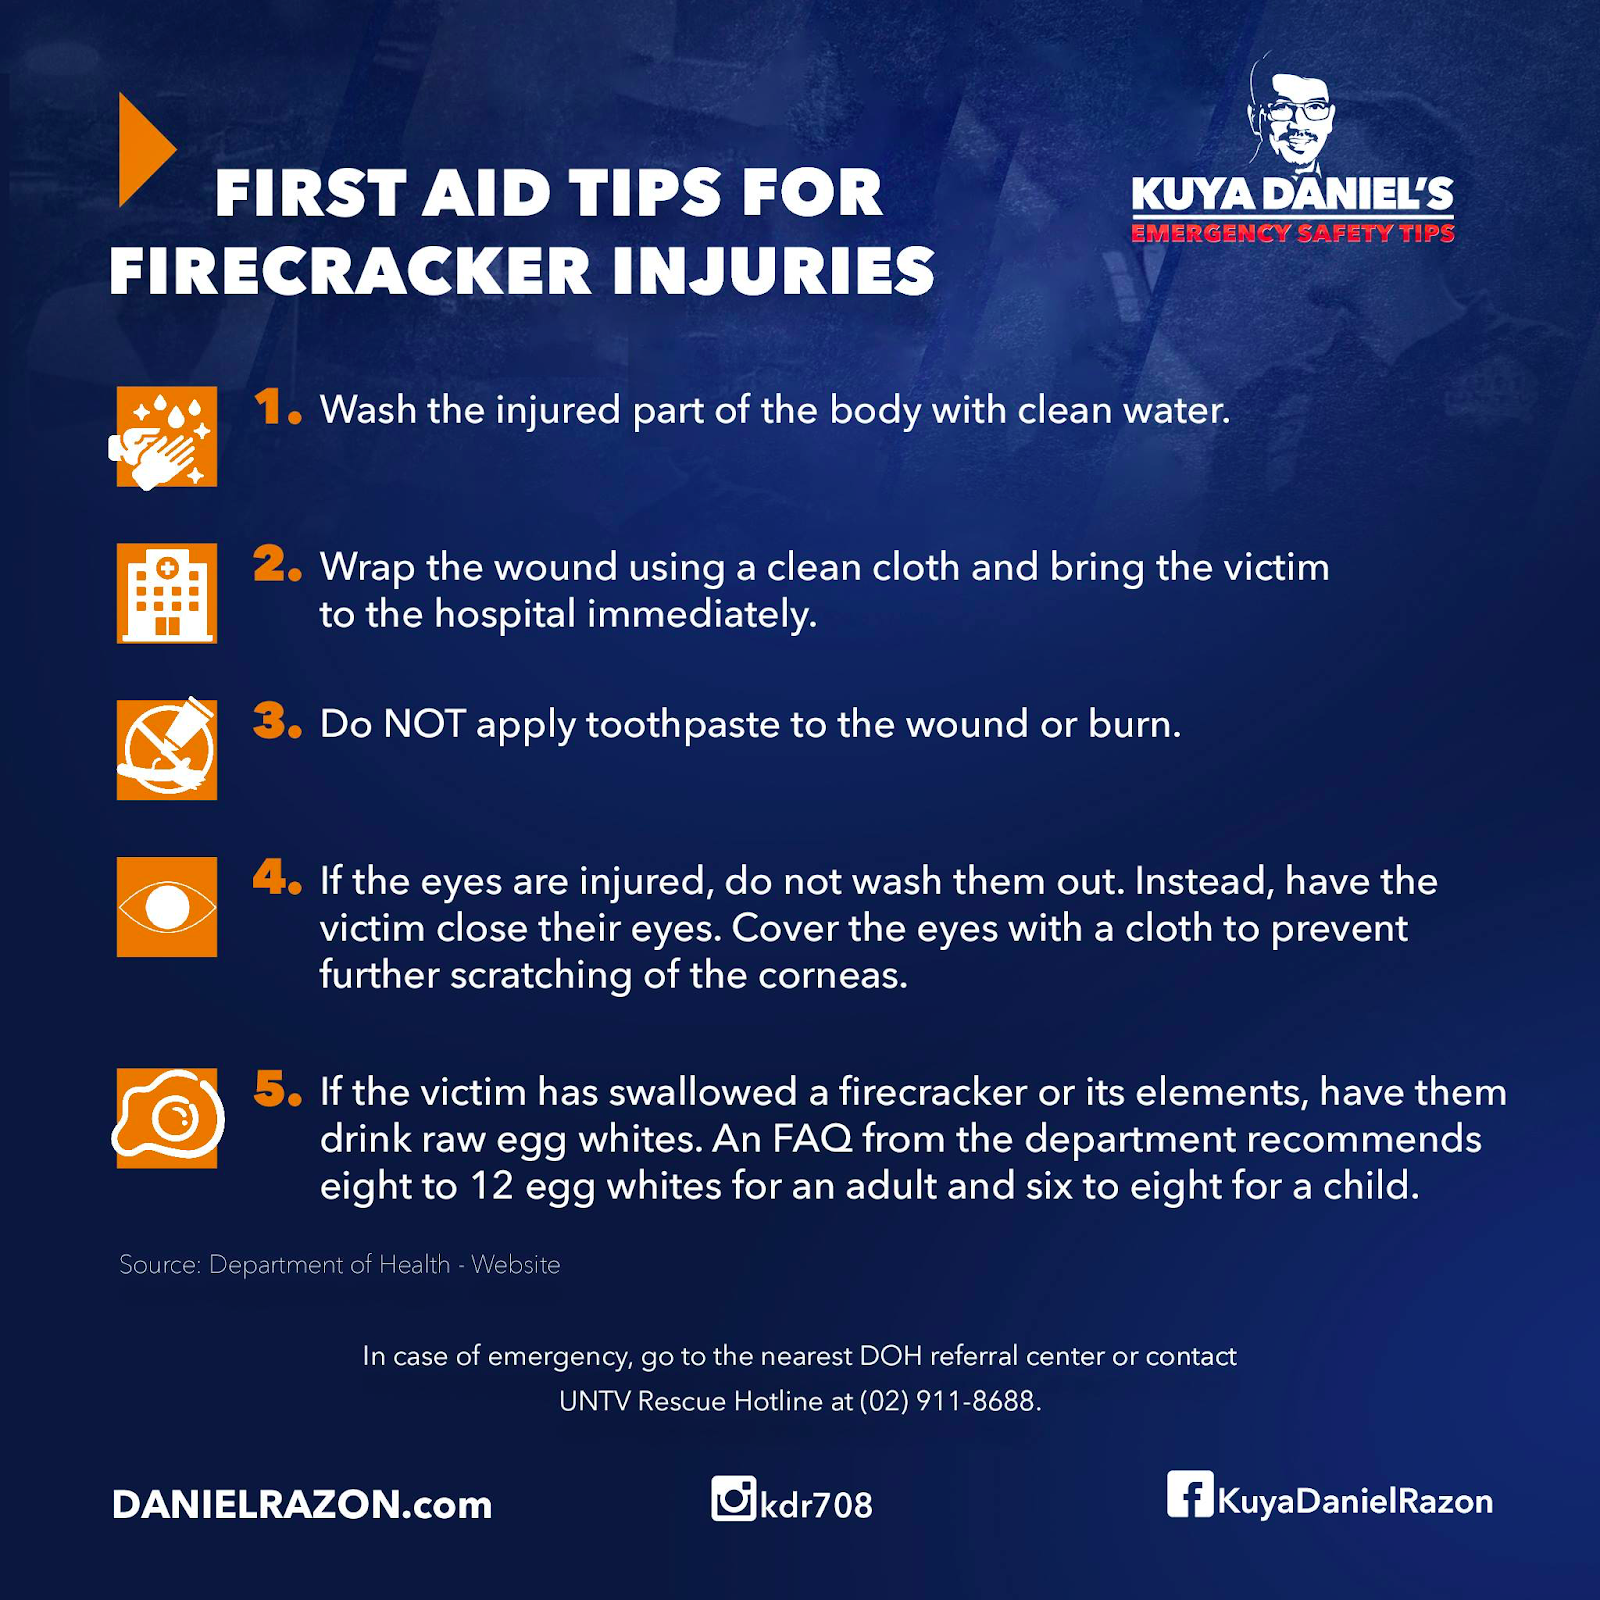 safety tips when dealing with firecrackers and fireworks